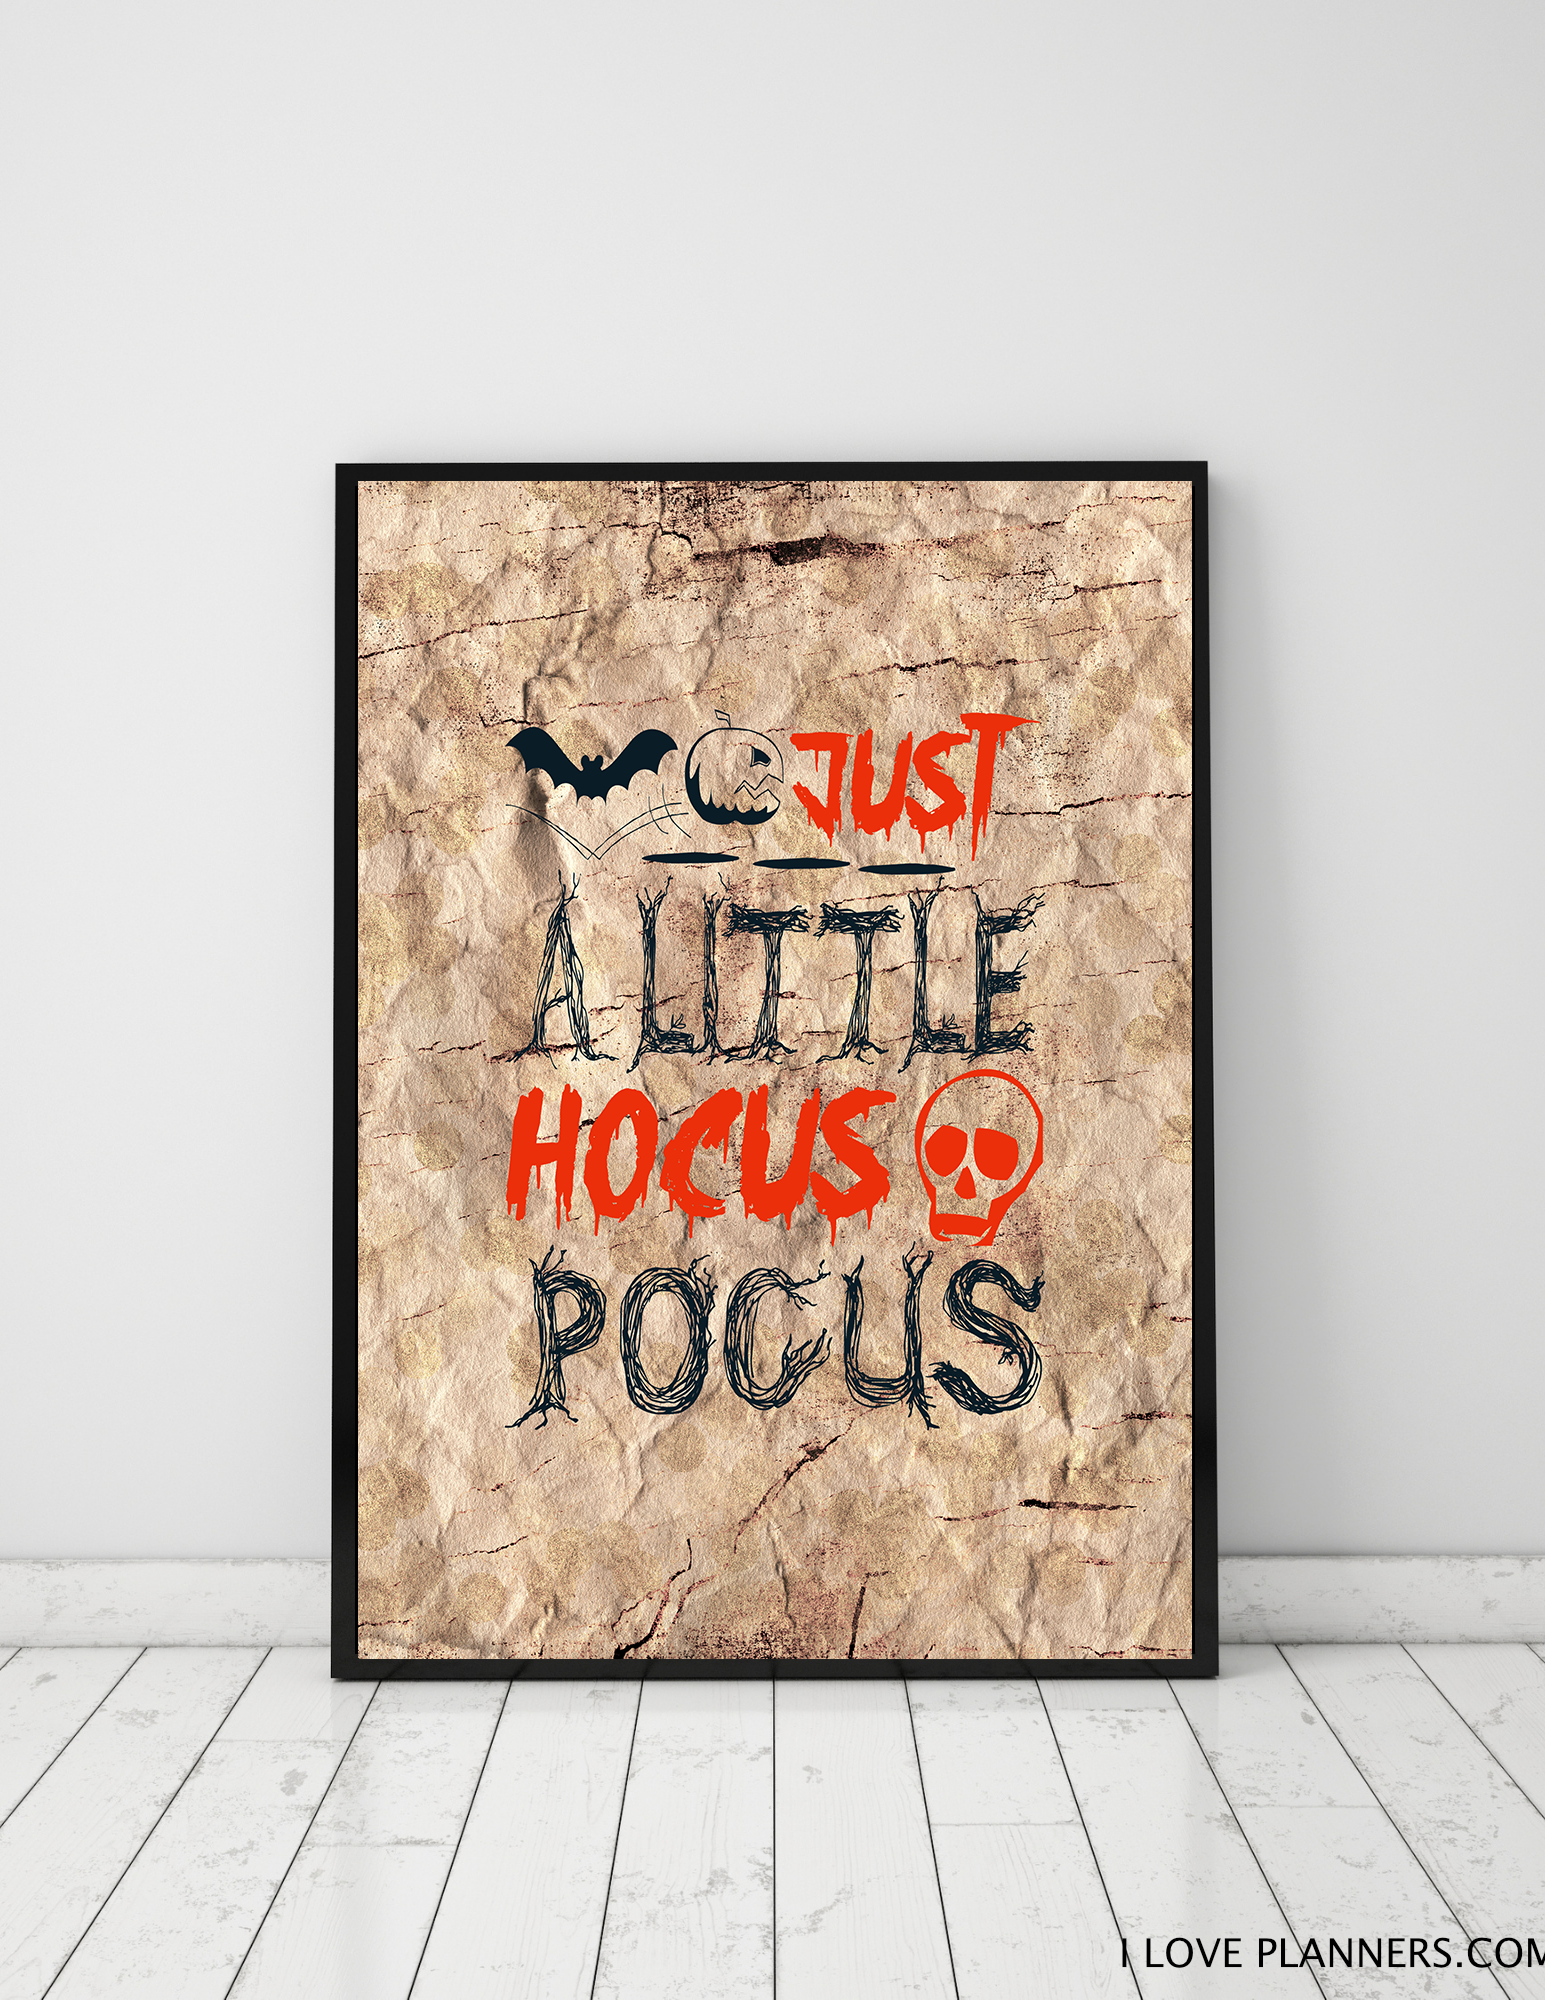 FREE Poster, Print It Yourself, DIY, Instant Download, Printable: Budget Halloween Decoration 8